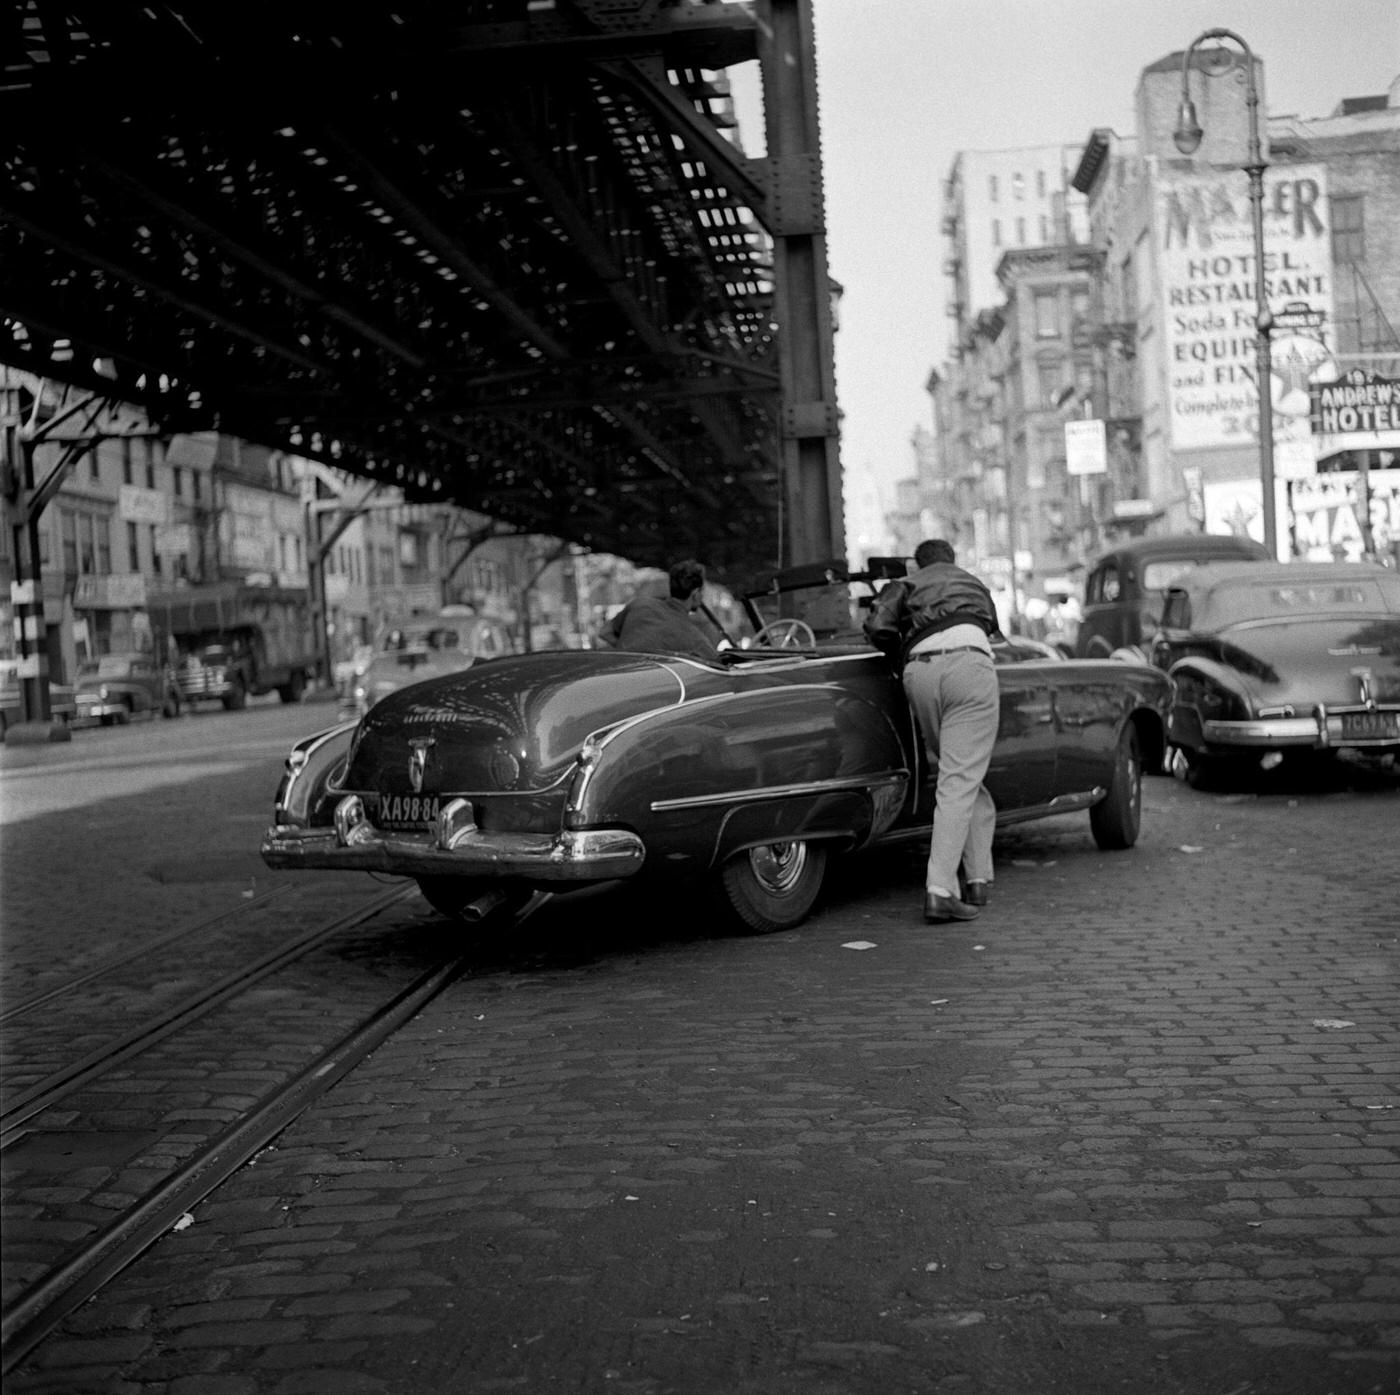 In The Shadow Of The Third Avenue El: Two Men Push A Car Onto Bowery Under The Train In New York, Manhattan, 1954